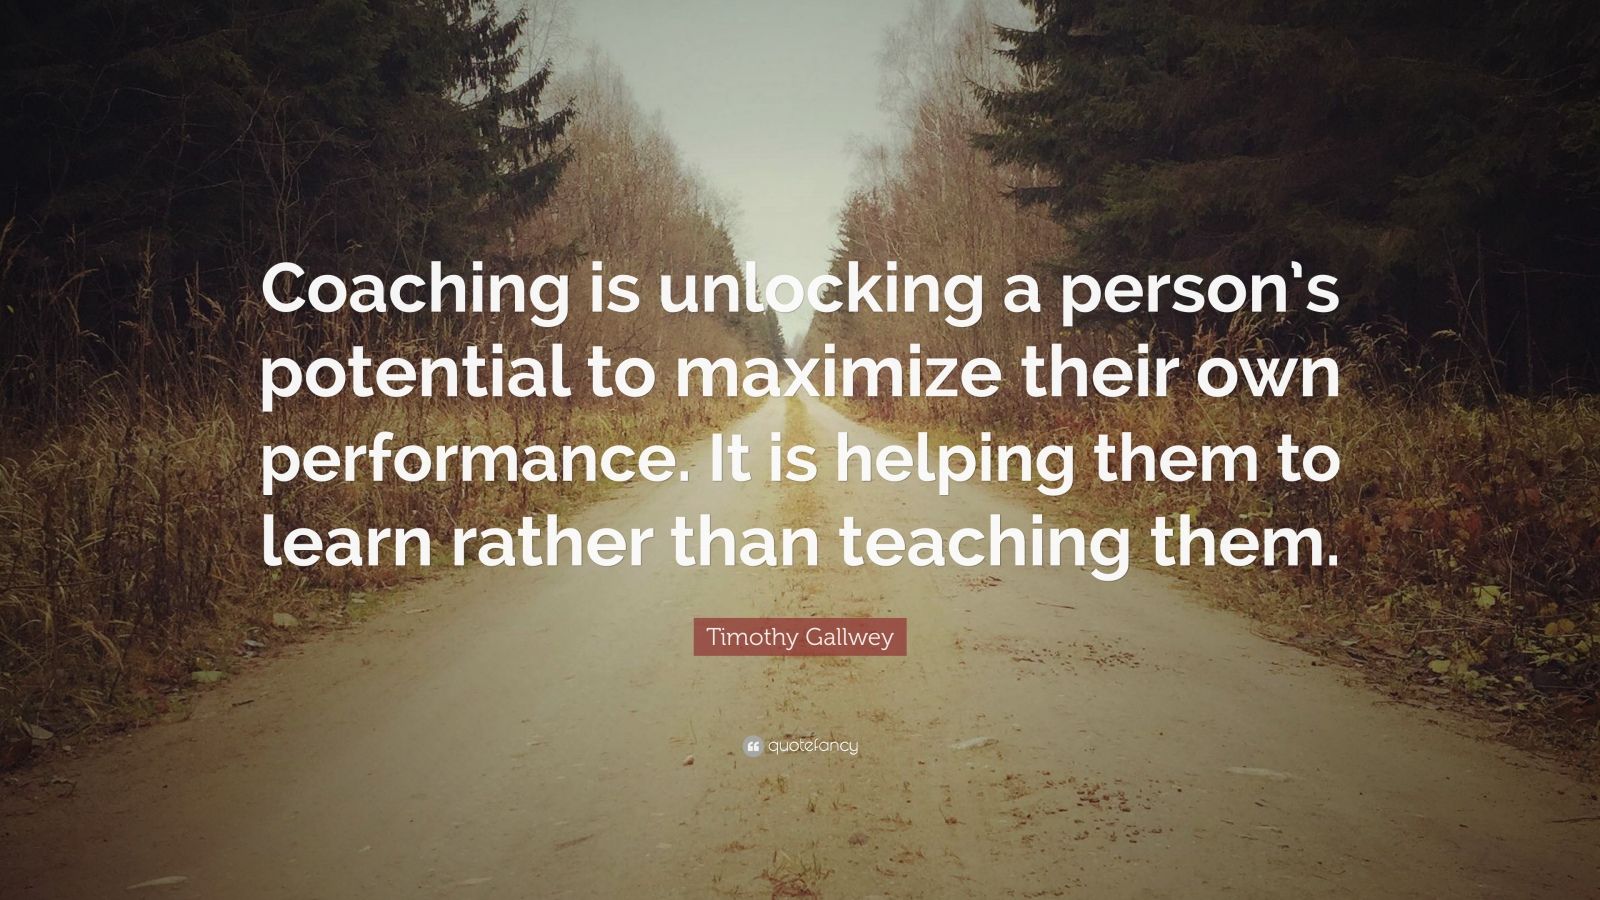 Timothy Gallwey Quote “Coaching is unlocking a person’s